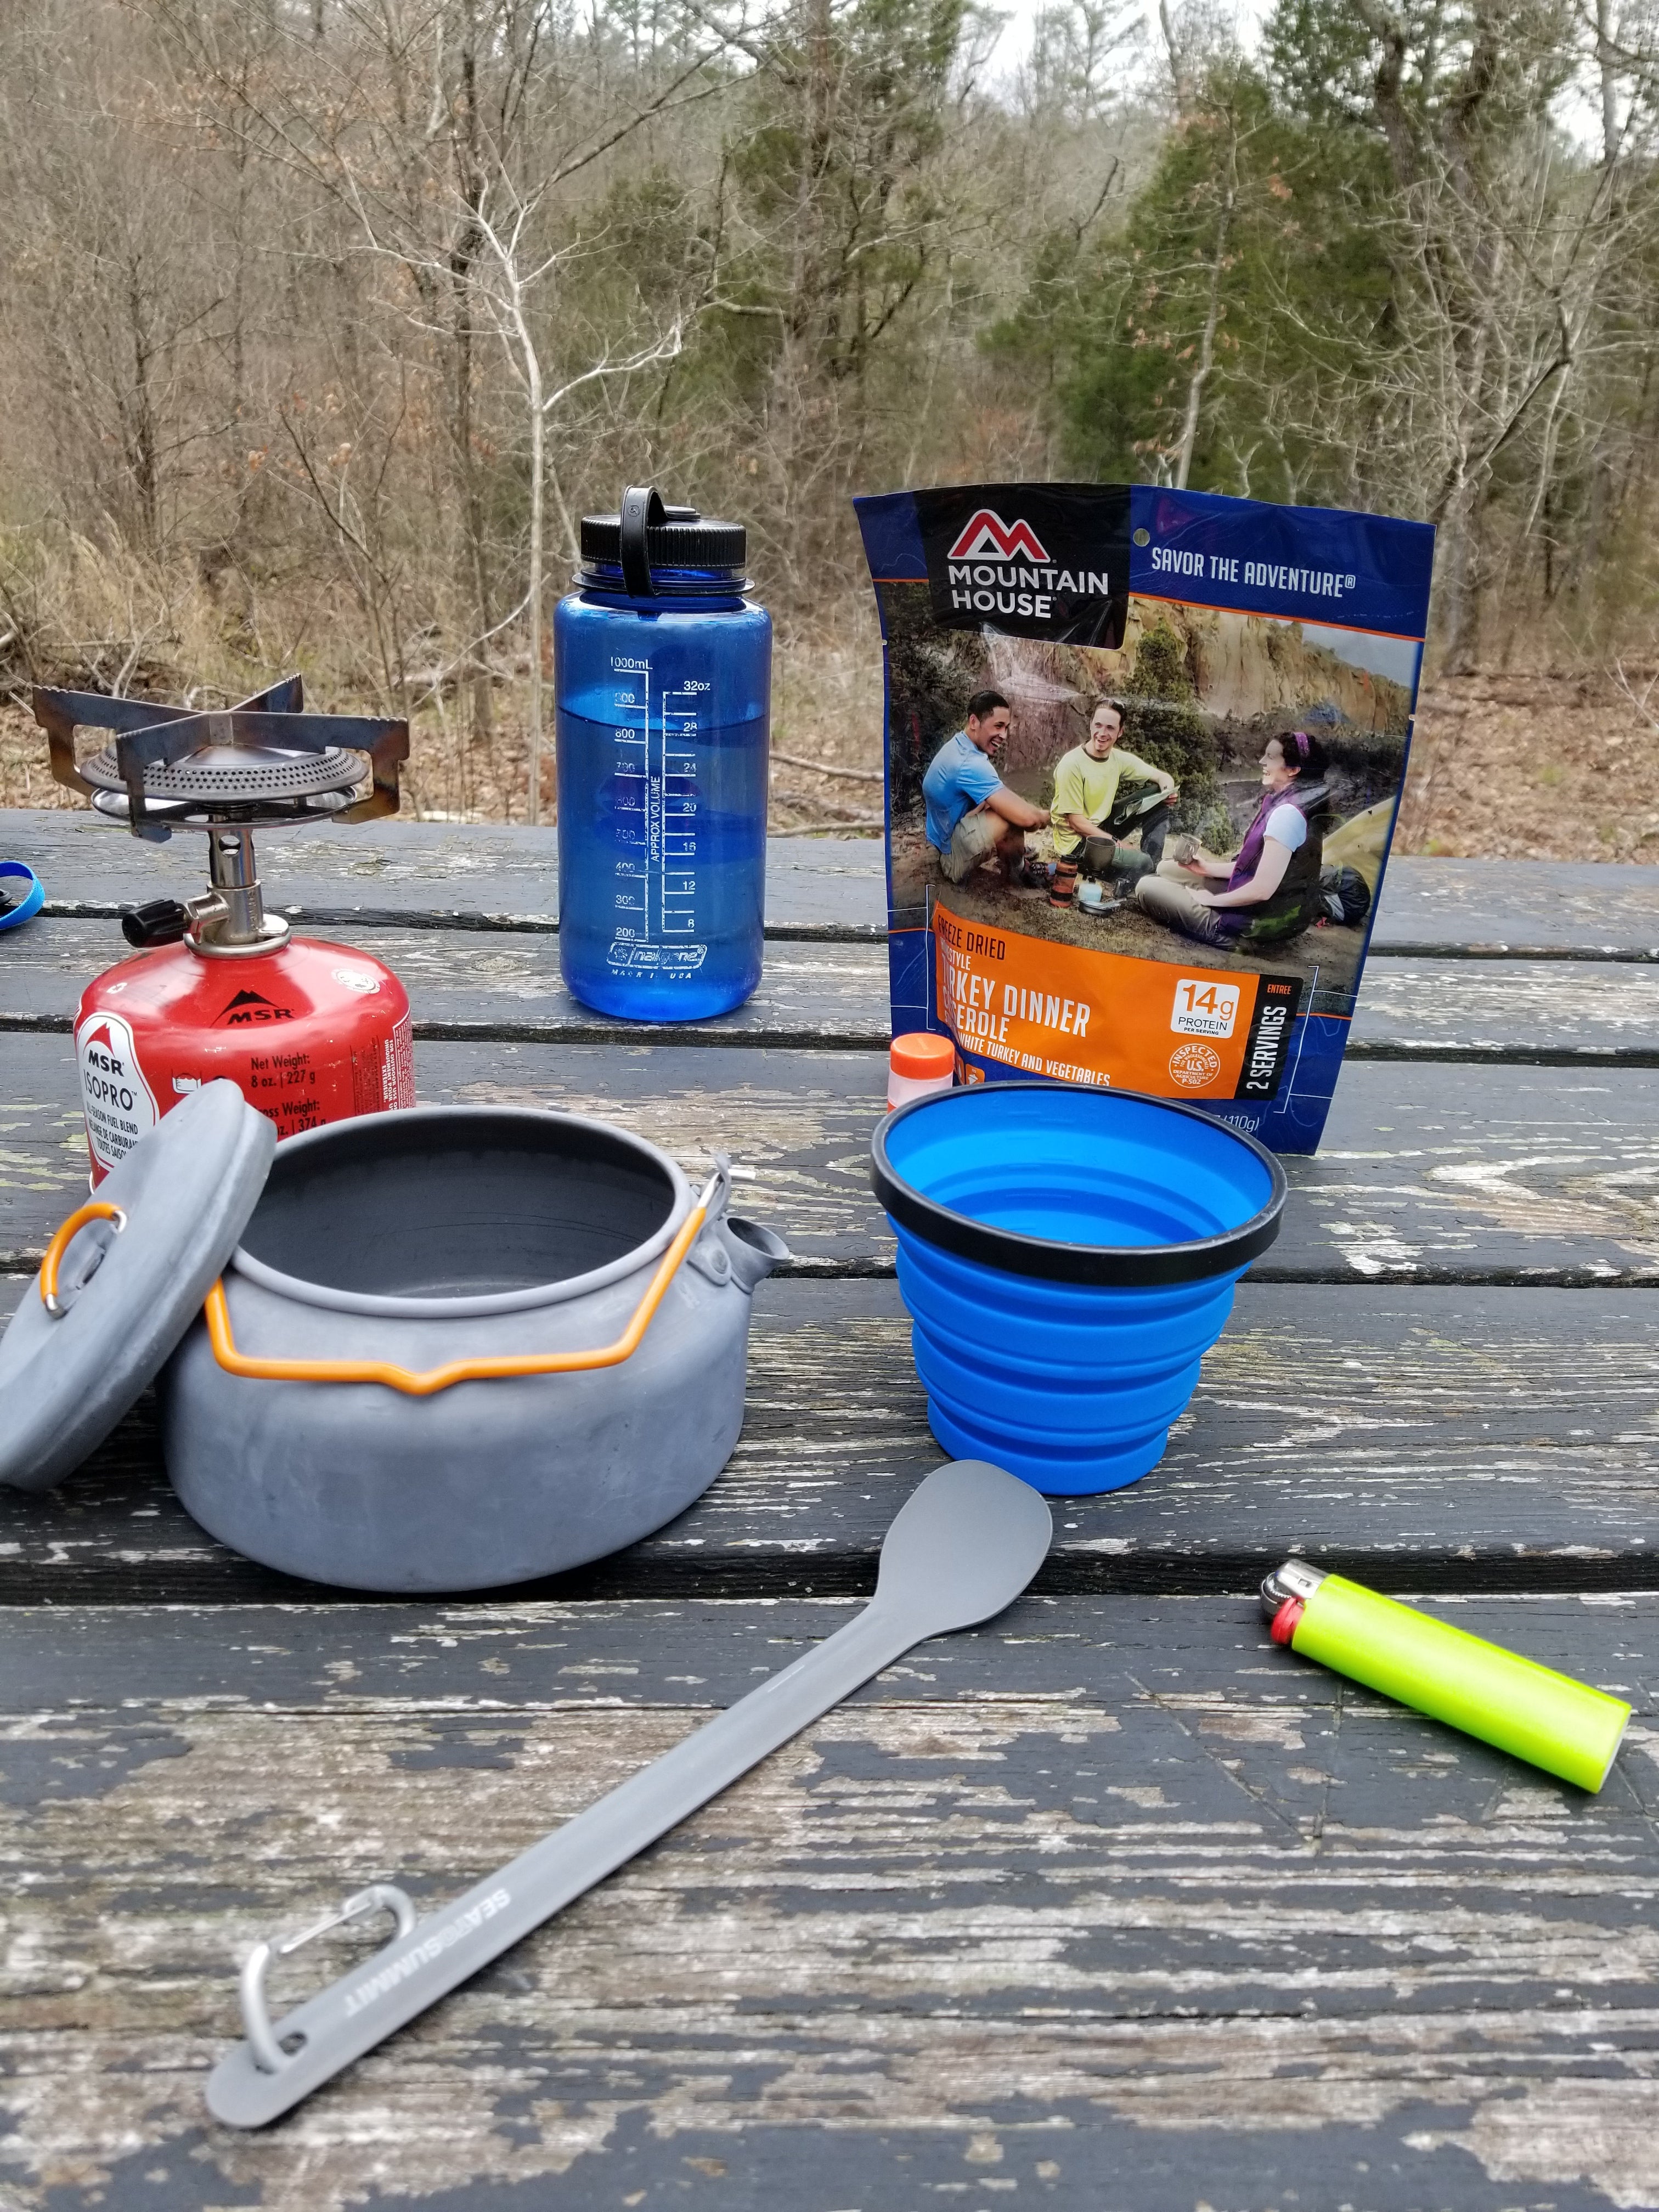 All the gear required to make this Turkey dinner on the trail. Less dishes than Thanksgiving dinner, for sure!